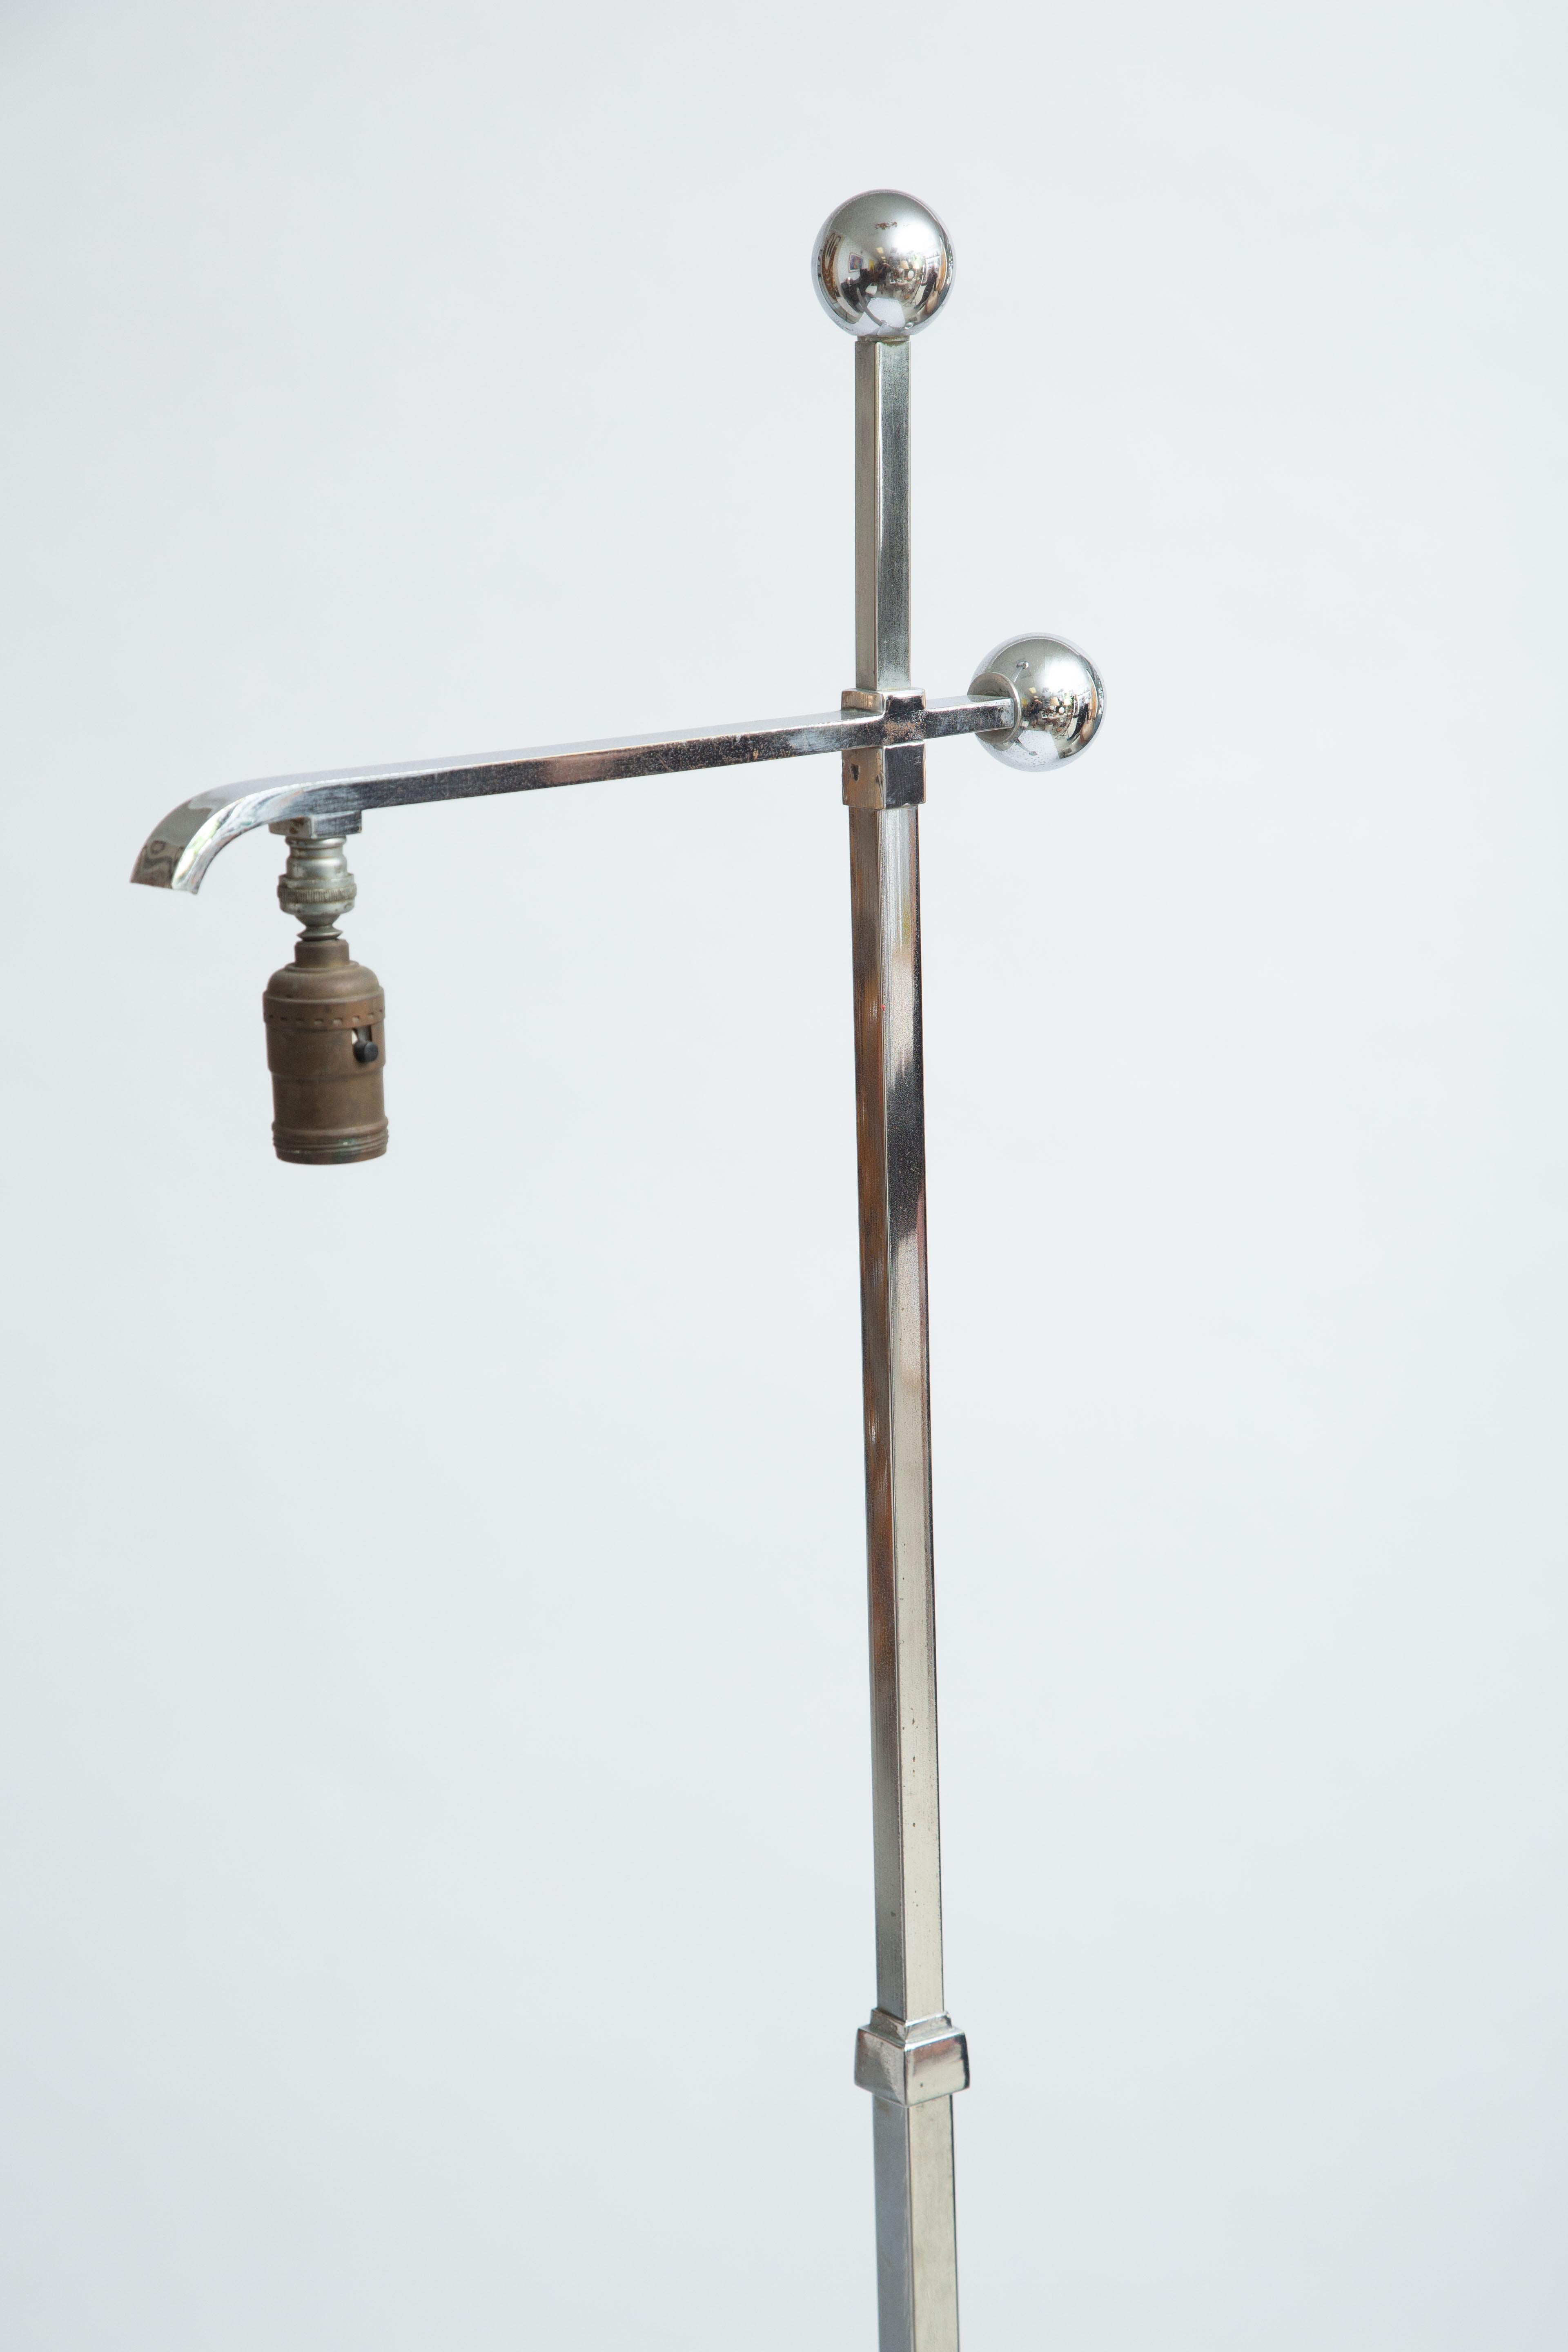 Nickel-plated floor lamp
Manufactured by Deskey-Vollmer.
Original surface
Similar example pictured in Donald Deskey by David A Hanks.